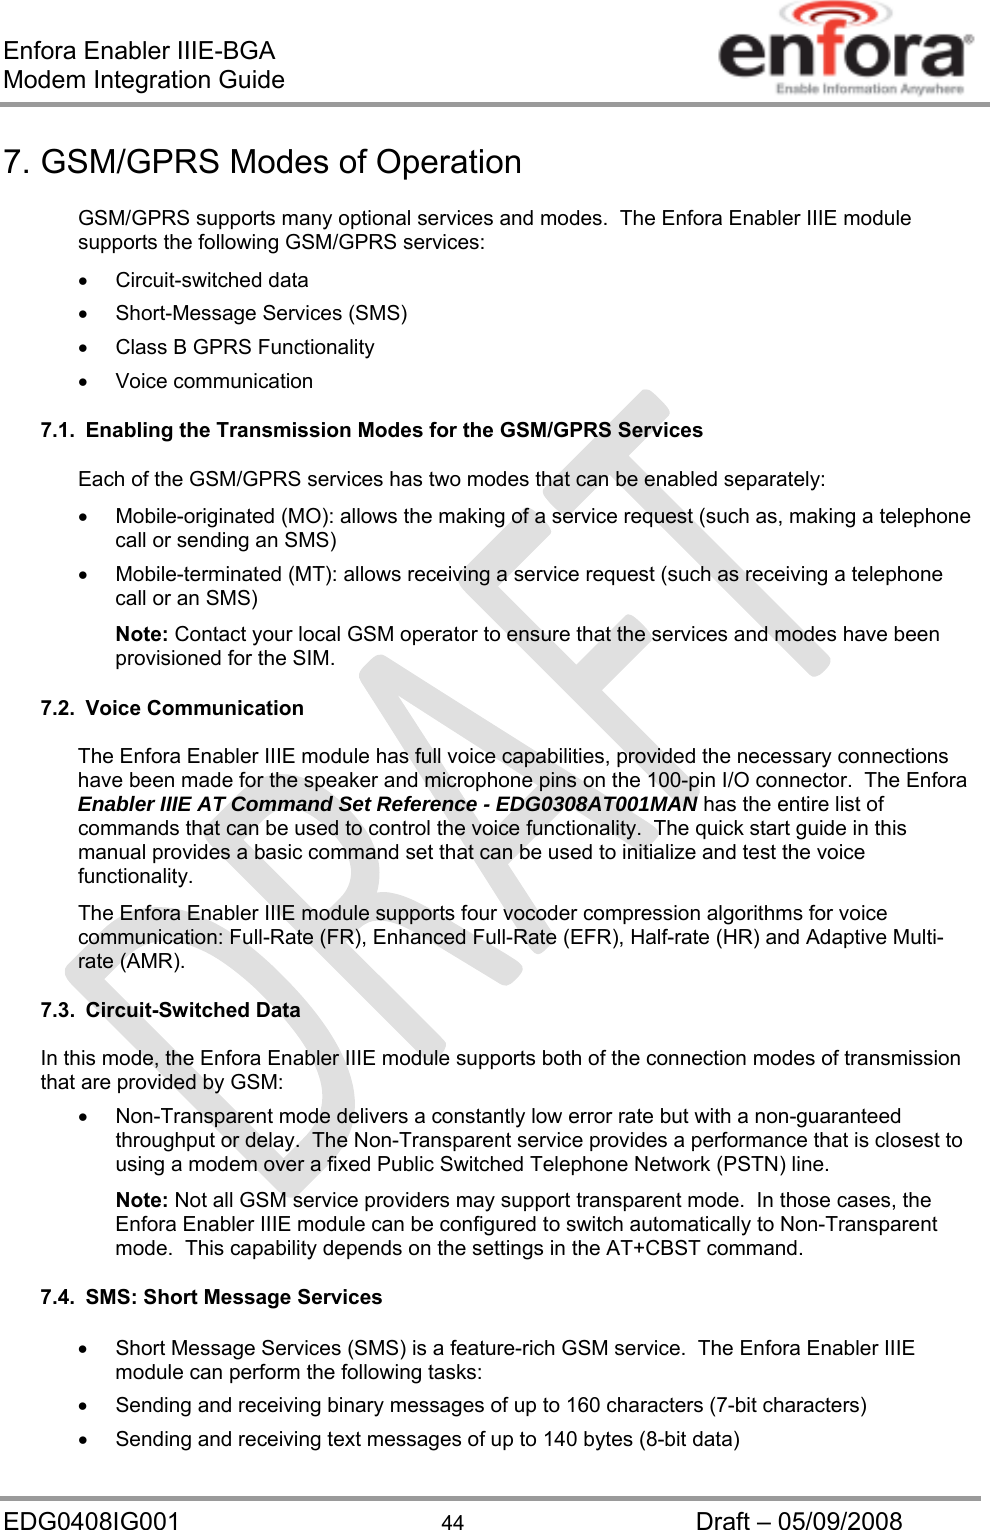 Enfora Enabler IIIE-BGA Modem Integration Guide EDG0408IG001  44  Draft – 05/09/2008 7. GSM/GPRS Modes of Operation GSM/GPRS supports many optional services and modes.  The Enfora Enabler IIIE module supports the following GSM/GPRS services:  Circuit-switched data   Short-Message Services (SMS)   Class B GPRS Functionality  Voice communication 7.1.  Enabling the Transmission Modes for the GSM/GPRS Services Each of the GSM/GPRS services has two modes that can be enabled separately:   Mobile-originated (MO): allows the making of a service request (such as, making a telephone call or sending an SMS)   Mobile-terminated (MT): allows receiving a service request (such as receiving a telephone call or an SMS) Note: Contact your local GSM operator to ensure that the services and modes have been provisioned for the SIM. 7.2. Voice Communication The Enfora Enabler IIIE module has full voice capabilities, provided the necessary connections have been made for the speaker and microphone pins on the 100-pin I/O connector.  The Enfora Enabler IIIE AT Command Set Reference - EDG0308AT001MAN has the entire list of commands that can be used to control the voice functionality.  The quick start guide in this manual provides a basic command set that can be used to initialize and test the voice functionality. The Enfora Enabler IIIE module supports four vocoder compression algorithms for voice communication: Full-Rate (FR), Enhanced Full-Rate (EFR), Half-rate (HR) and Adaptive Multi-rate (AMR). 7.3. Circuit-Switched Data In this mode, the Enfora Enabler IIIE module supports both of the connection modes of transmission that are provided by GSM:   Non-Transparent mode delivers a constantly low error rate but with a non-guaranteed throughput or delay.  The Non-Transparent service provides a performance that is closest to using a modem over a fixed Public Switched Telephone Network (PSTN) line. Note: Not all GSM service providers may support transparent mode.  In those cases, the Enfora Enabler IIIE module can be configured to switch automatically to Non-Transparent mode.  This capability depends on the settings in the AT+CBST command. 7.4.  SMS: Short Message Services   Short Message Services (SMS) is a feature-rich GSM service.  The Enfora Enabler IIIE module can perform the following tasks:   Sending and receiving binary messages of up to 160 characters (7-bit characters)   Sending and receiving text messages of up to 140 bytes (8-bit data) 